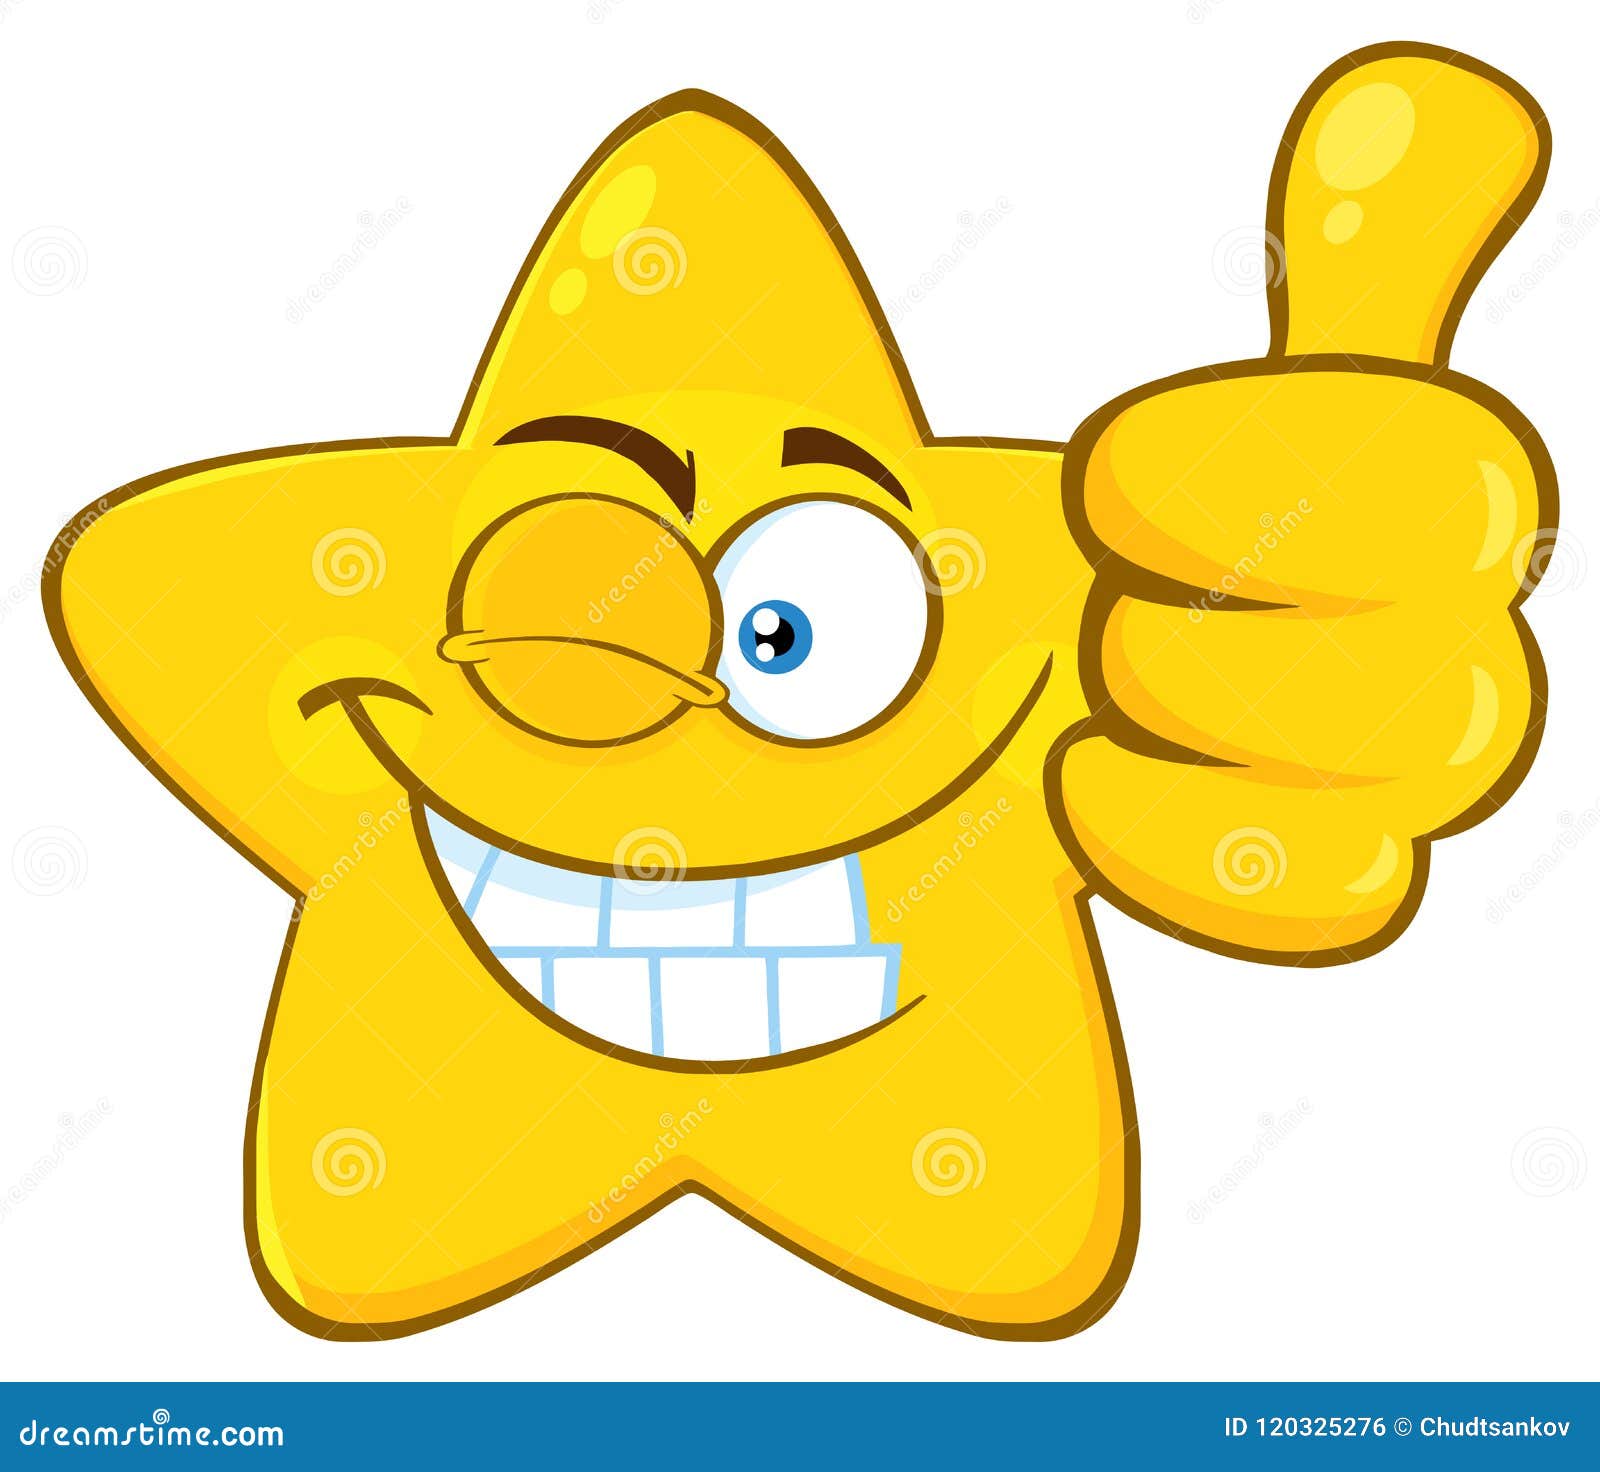 Smiling Yellow Star Cartoon Emoji Face Character With Wink